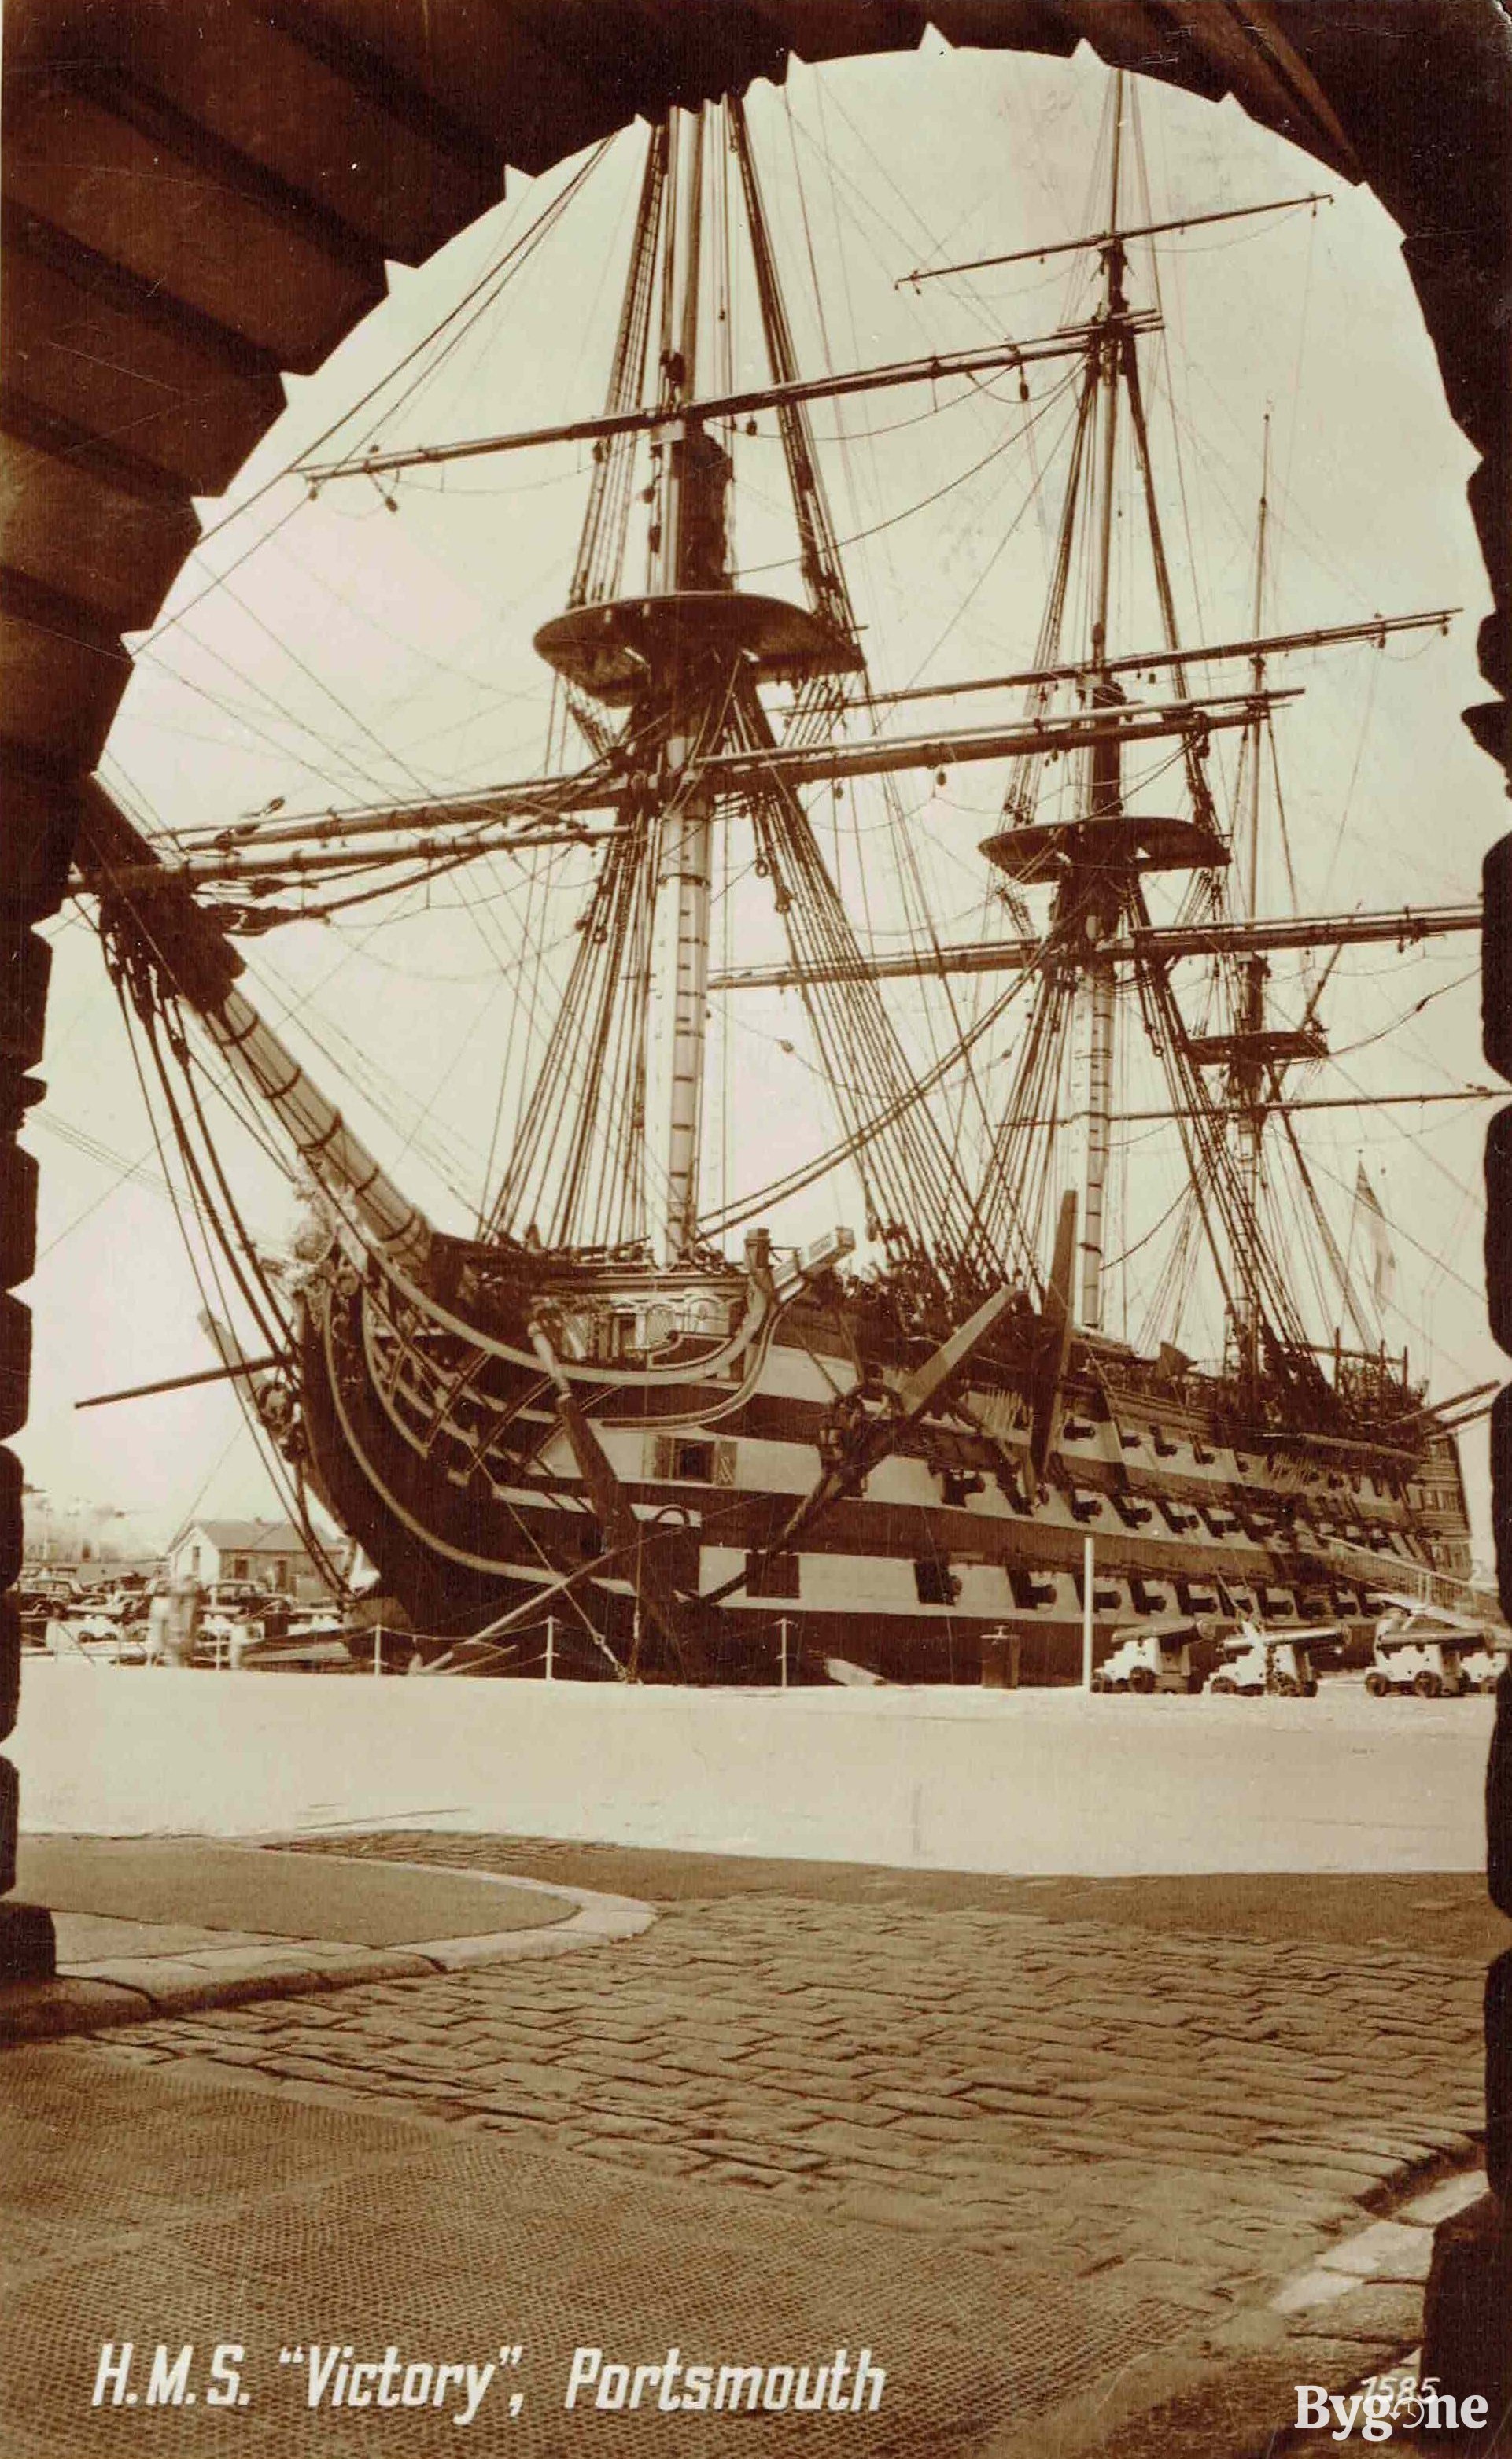 Portrait taken from underneath a stone archway of a large, three-masted, full-rigged ship, that is docked. The lower left reads 'H.M.S. "Victory", Portsmouth'